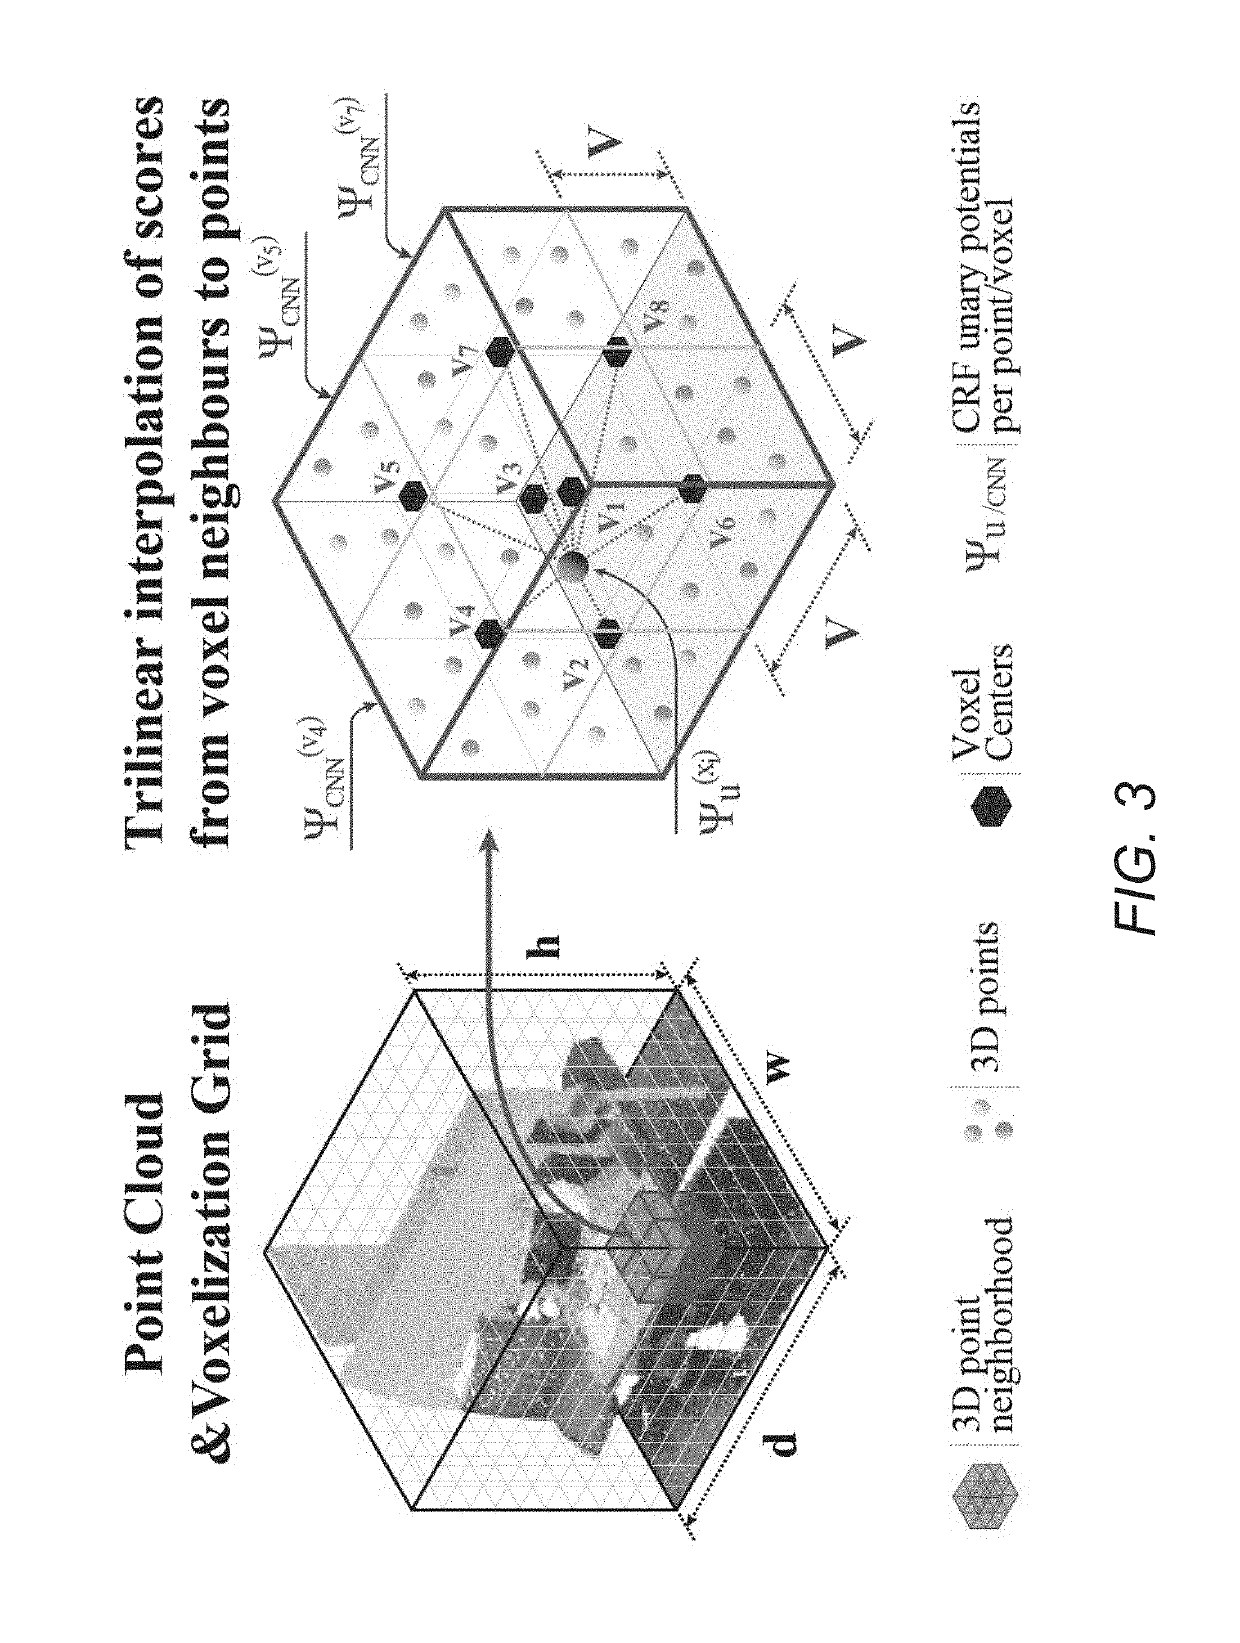 Systems and Methods for Semantic Segmentation of 3D Point Clouds